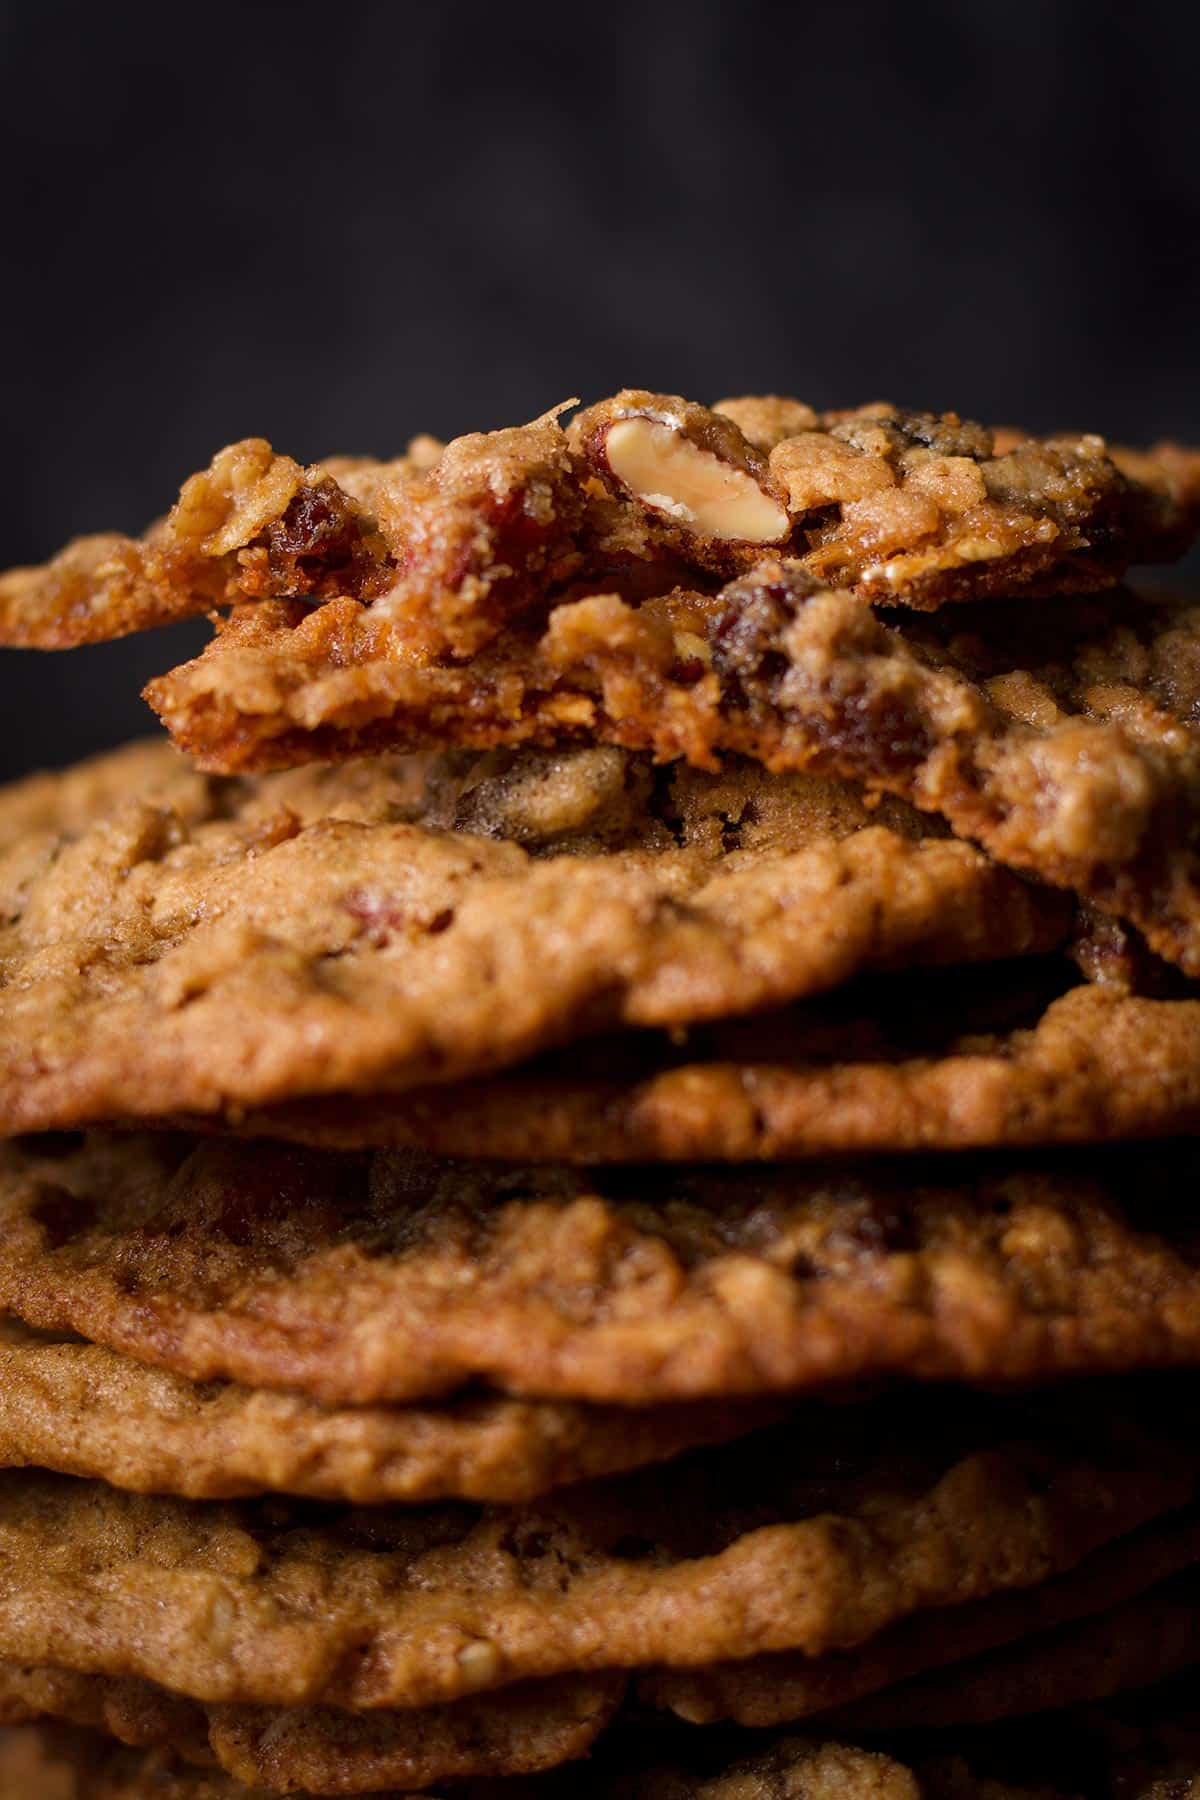 A stack of oatmeal raisin cookies with the top cookie broken in half to reveal the soft, chewy center.